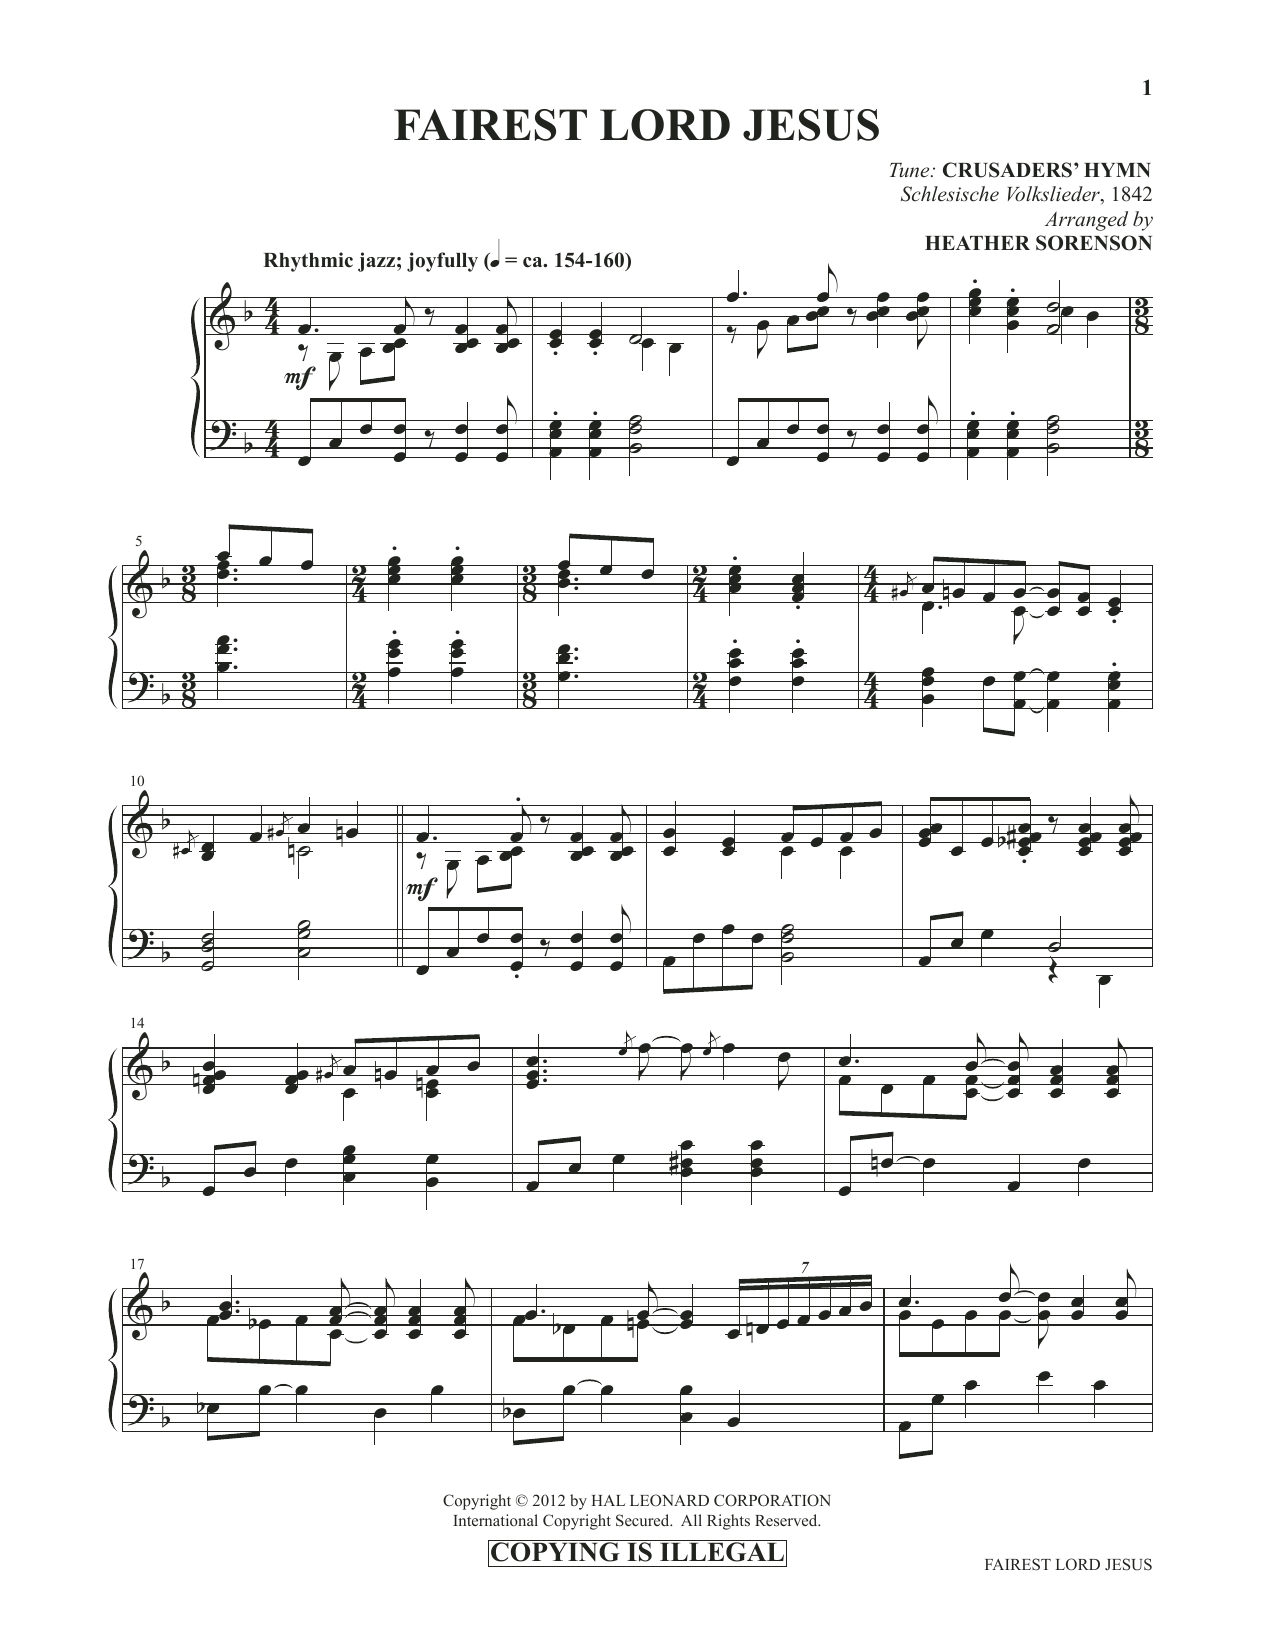 Download Heather Sorenson Fairest Lord Jesus (from Images: Sacred Sheet Music